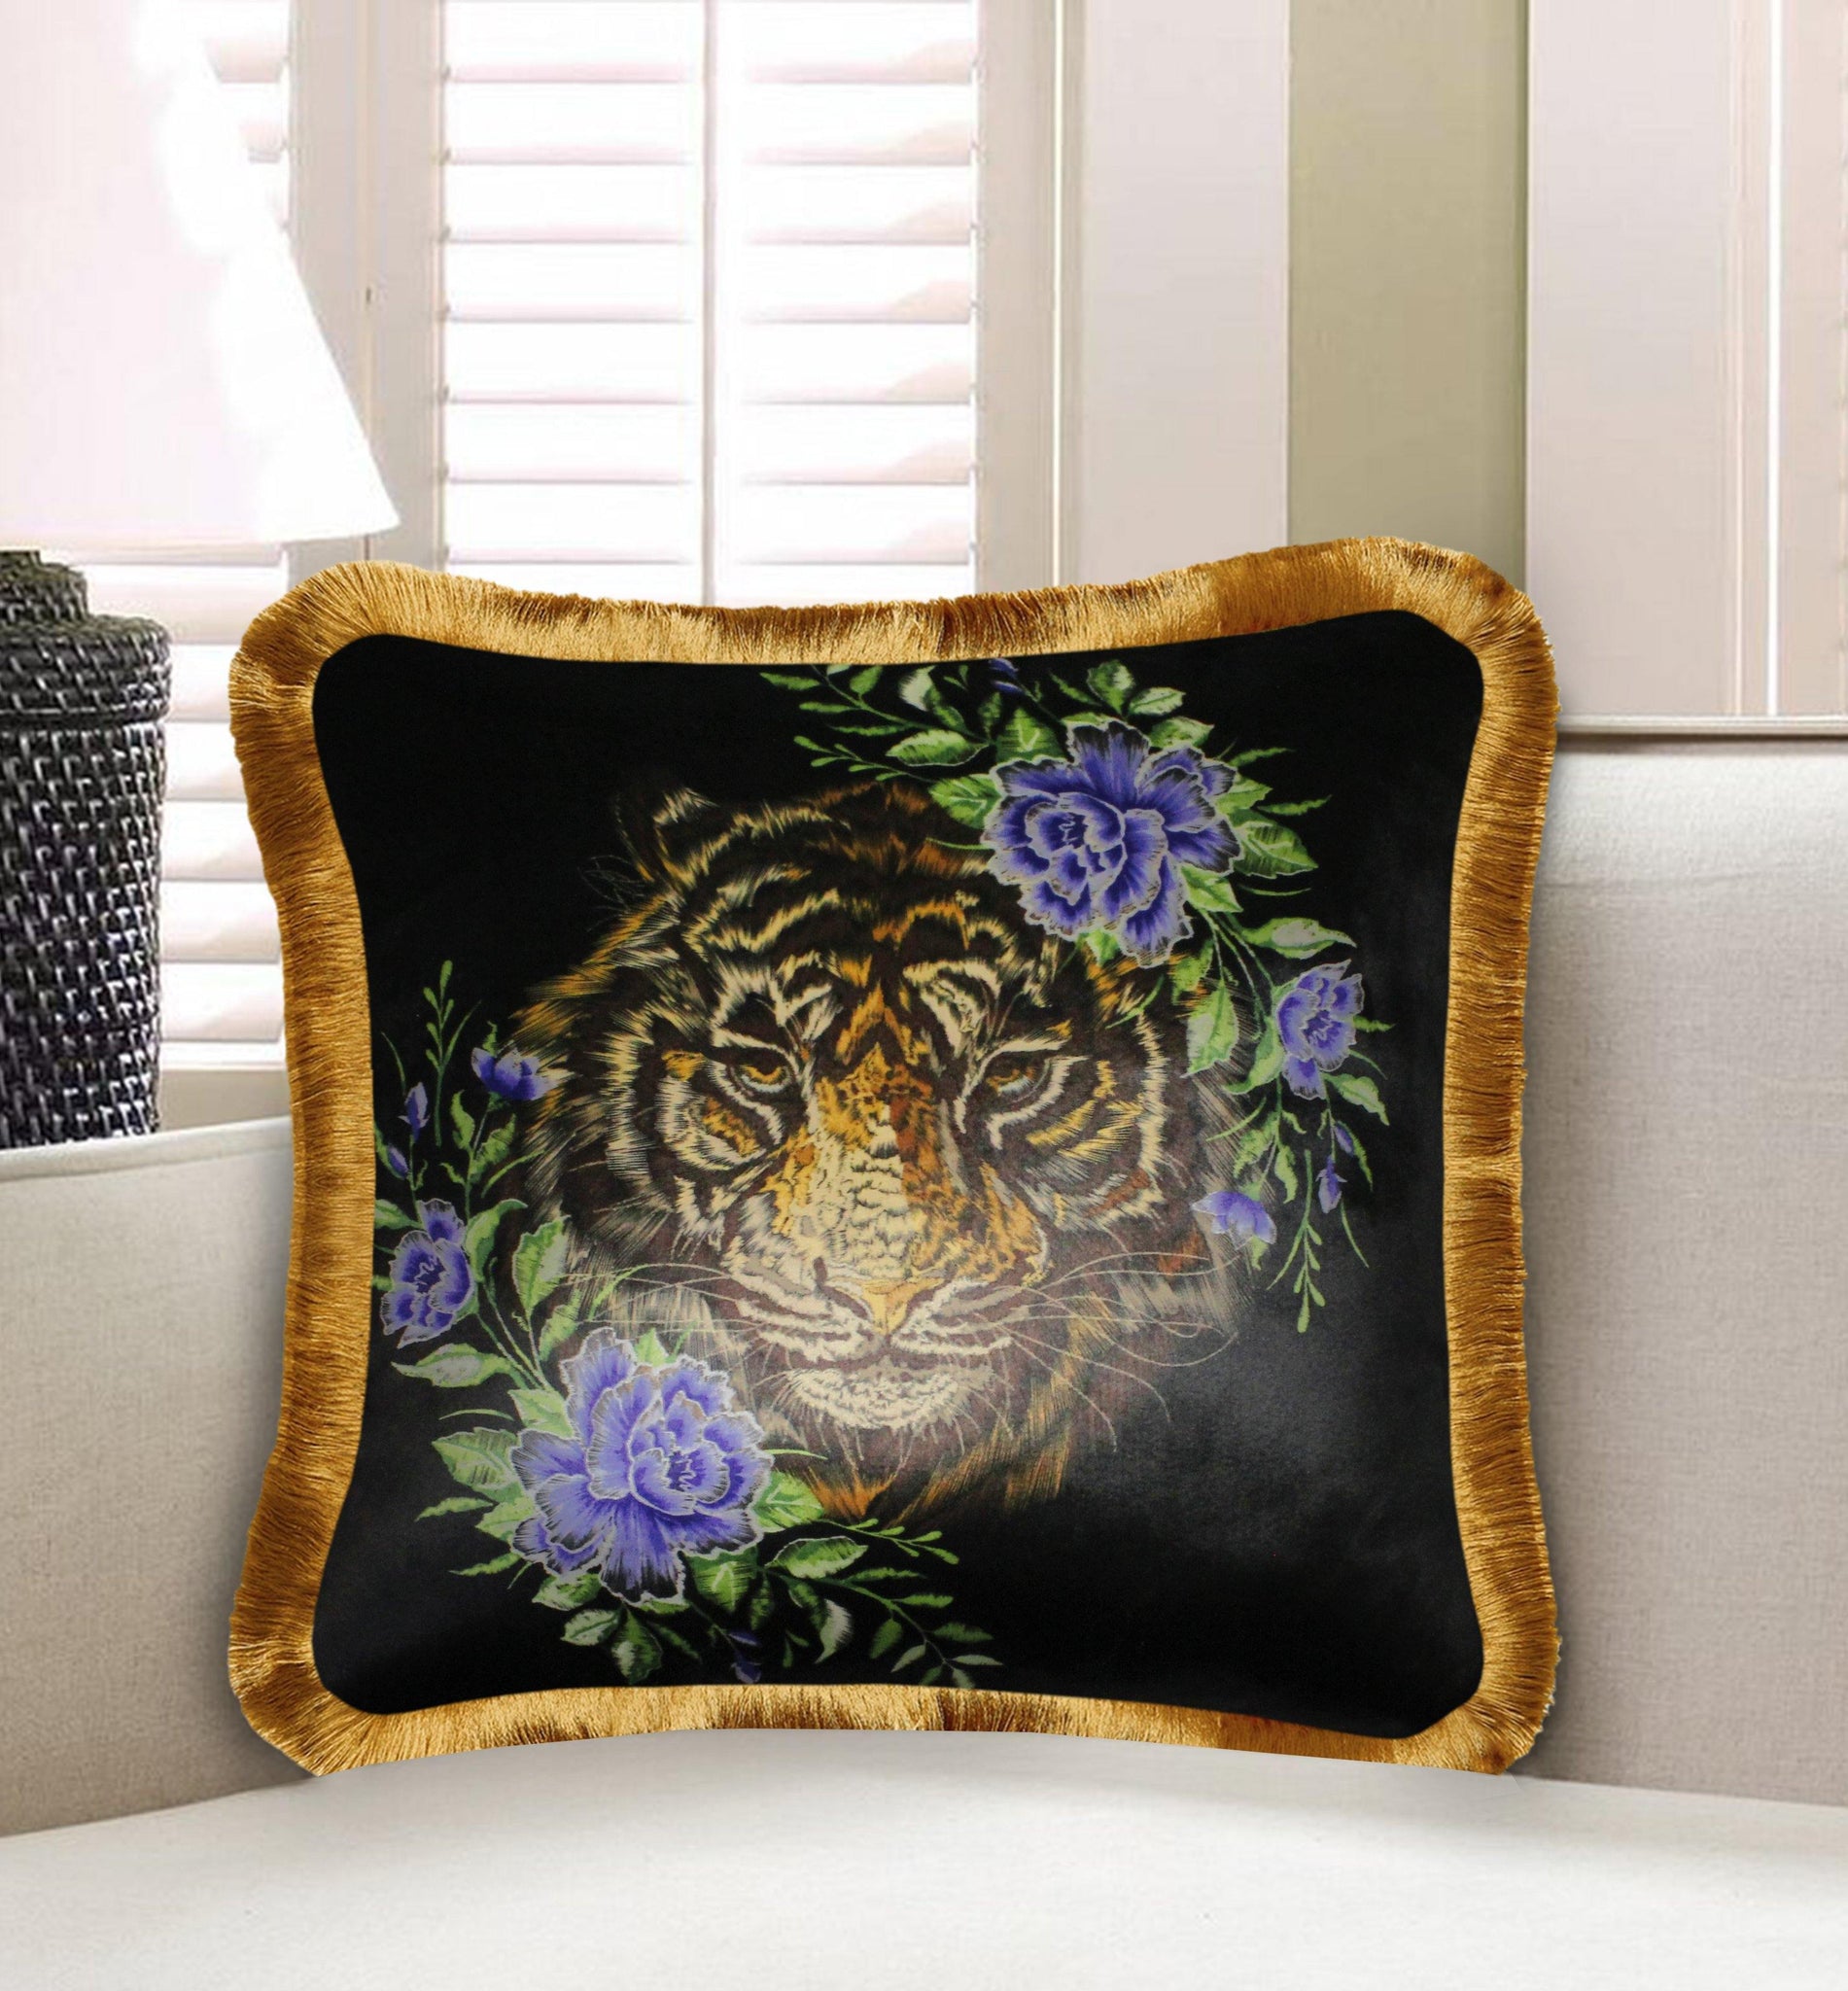  Velvet Cushion Cover Tiger and Flower Decorative Pillow Cover Home Decor Wysada for Sofa Chair Bedroom Living Room 45x45cm 18x18 Inches